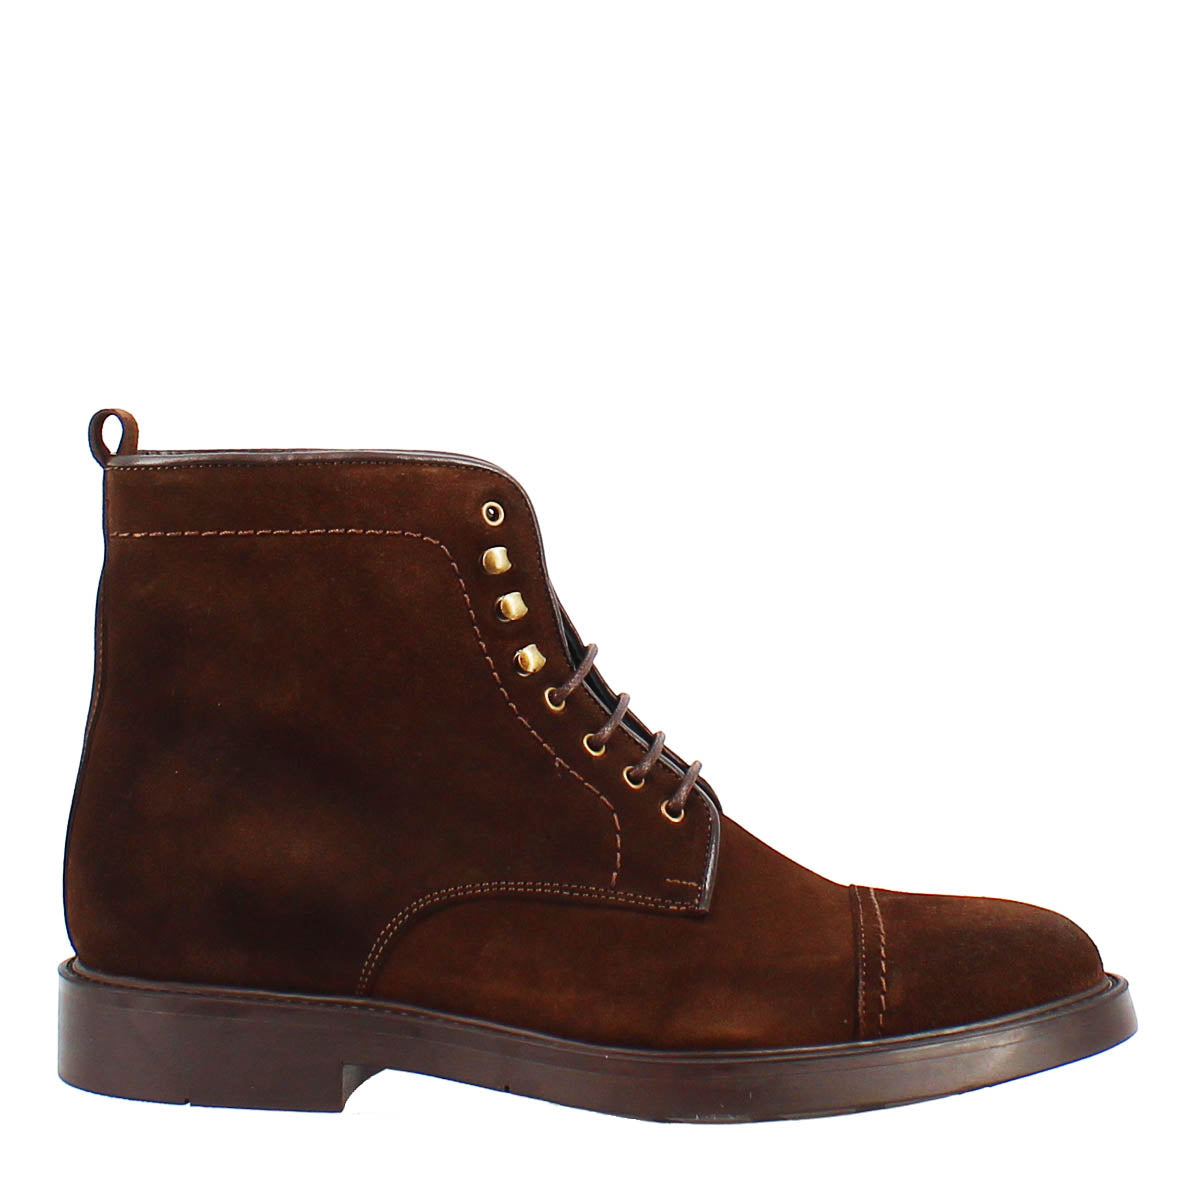 Brown suede ankle boot with rubber sole